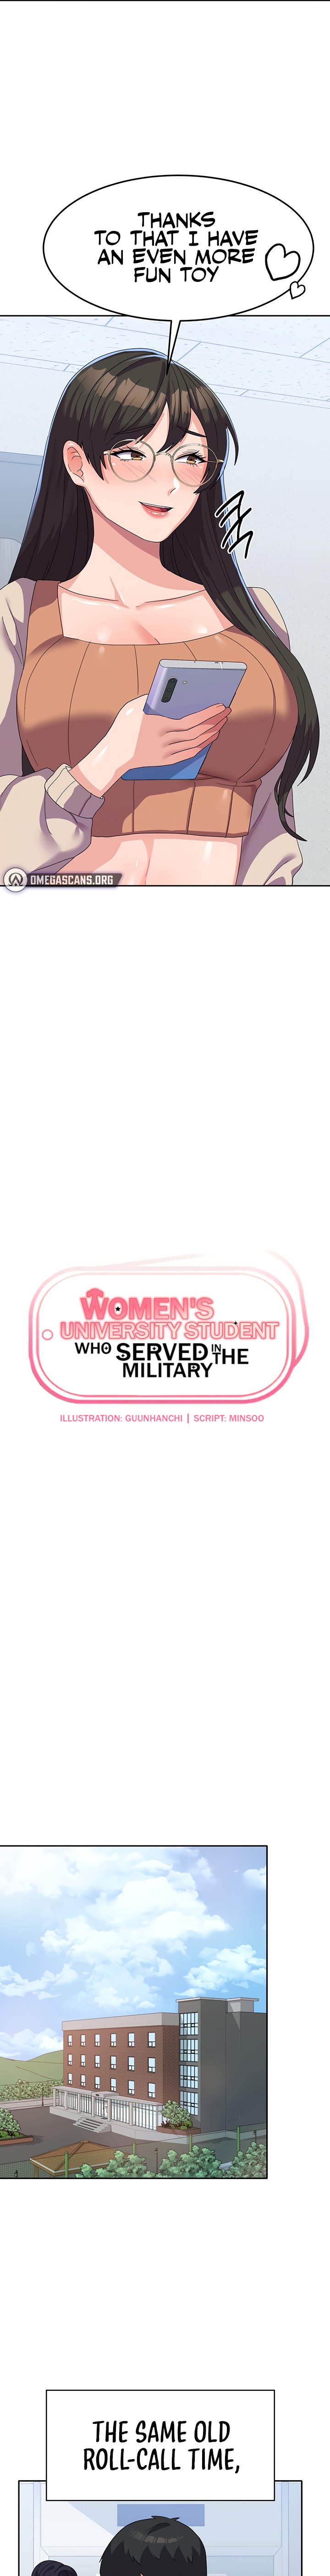 Women’s University Student who Served in the Military Chapter 17 - Page 5